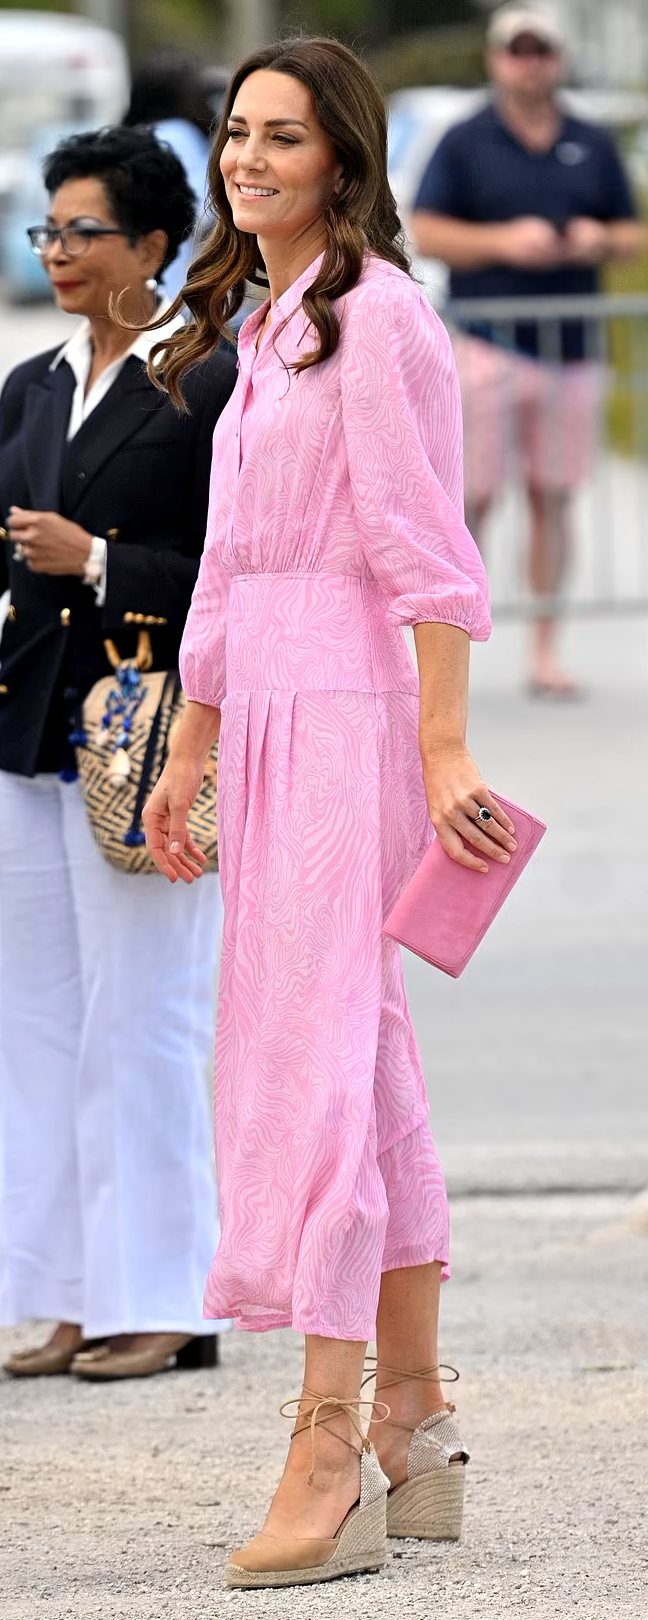 Rixo Izzy Pleated Shirtdress in Pink Marble Zebra as seen on Kate Middleton, The Duchess of Cambridge.